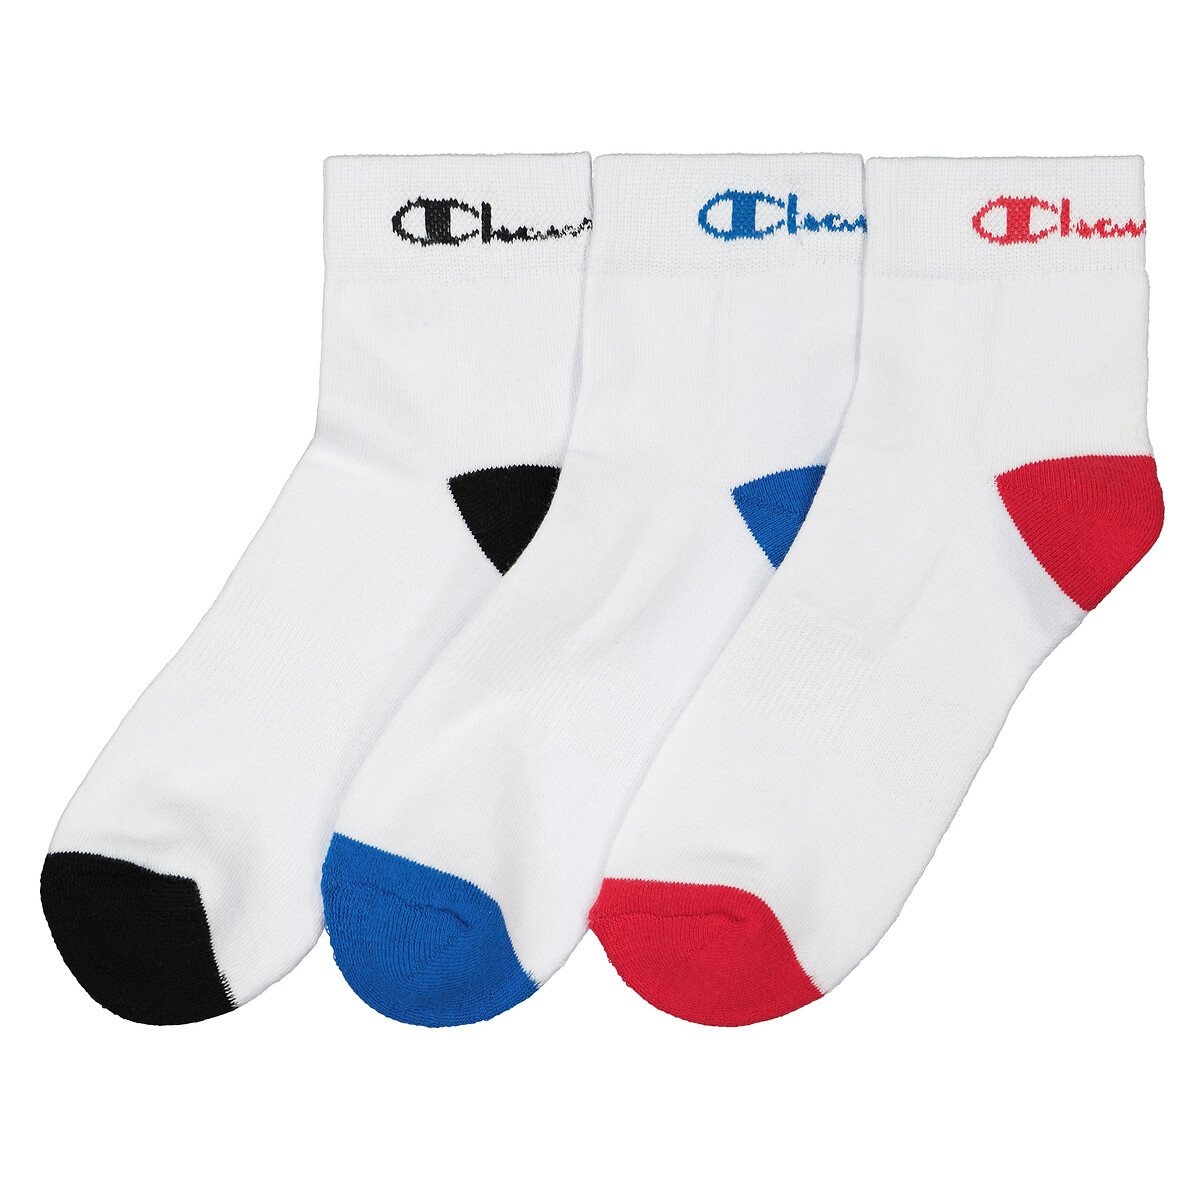 Image of Pack of 3 Pairs of Reinforced Trainer Socks in Cotton Mix